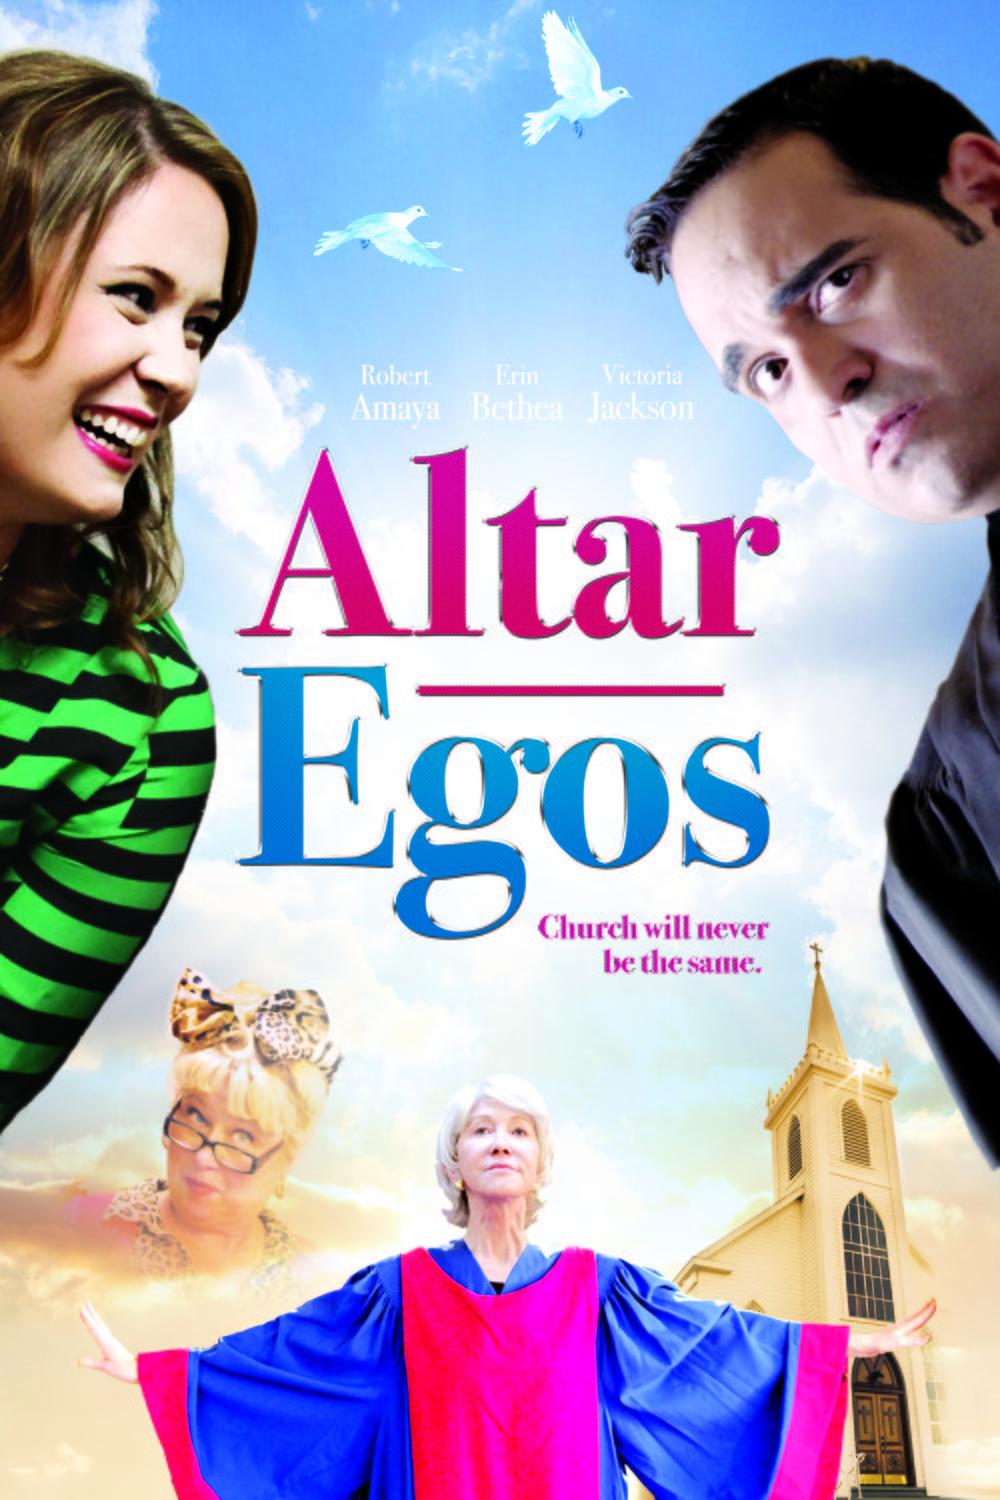 Poster of the movie Altar Egos